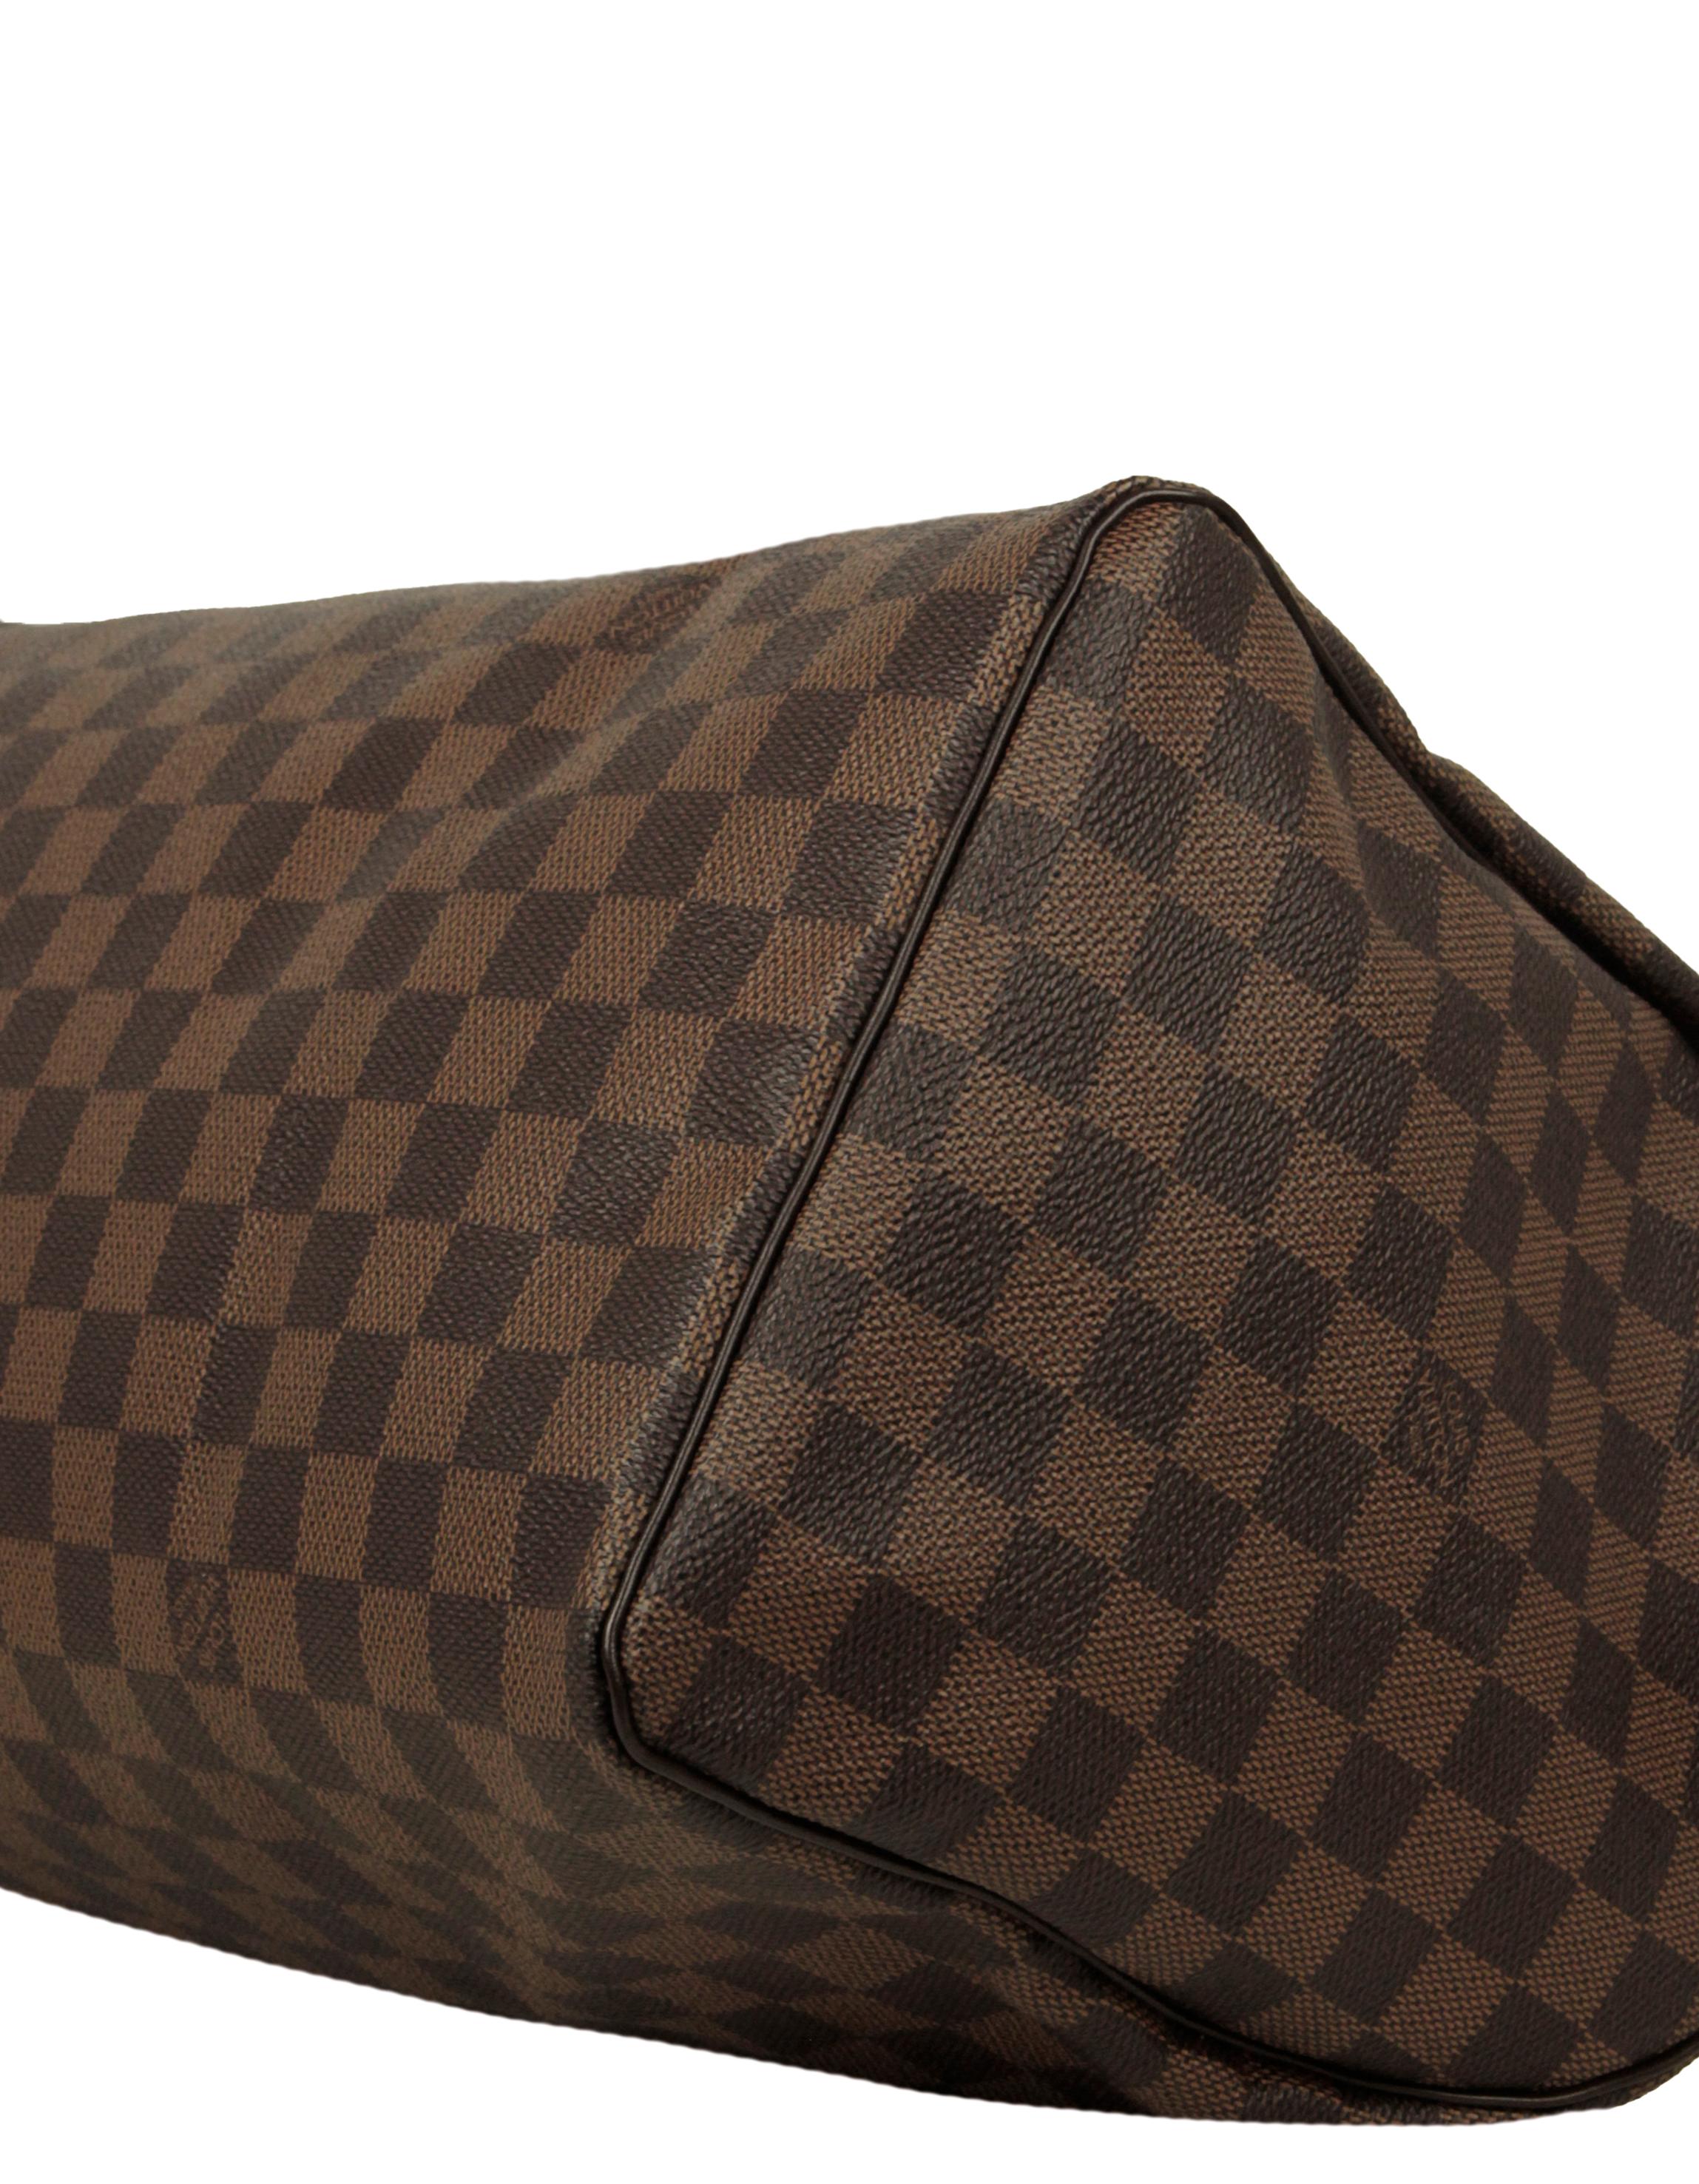 Louis Vuitton Damier Ebene Speedy 35 Bag In Excellent Condition For Sale In New York, NY